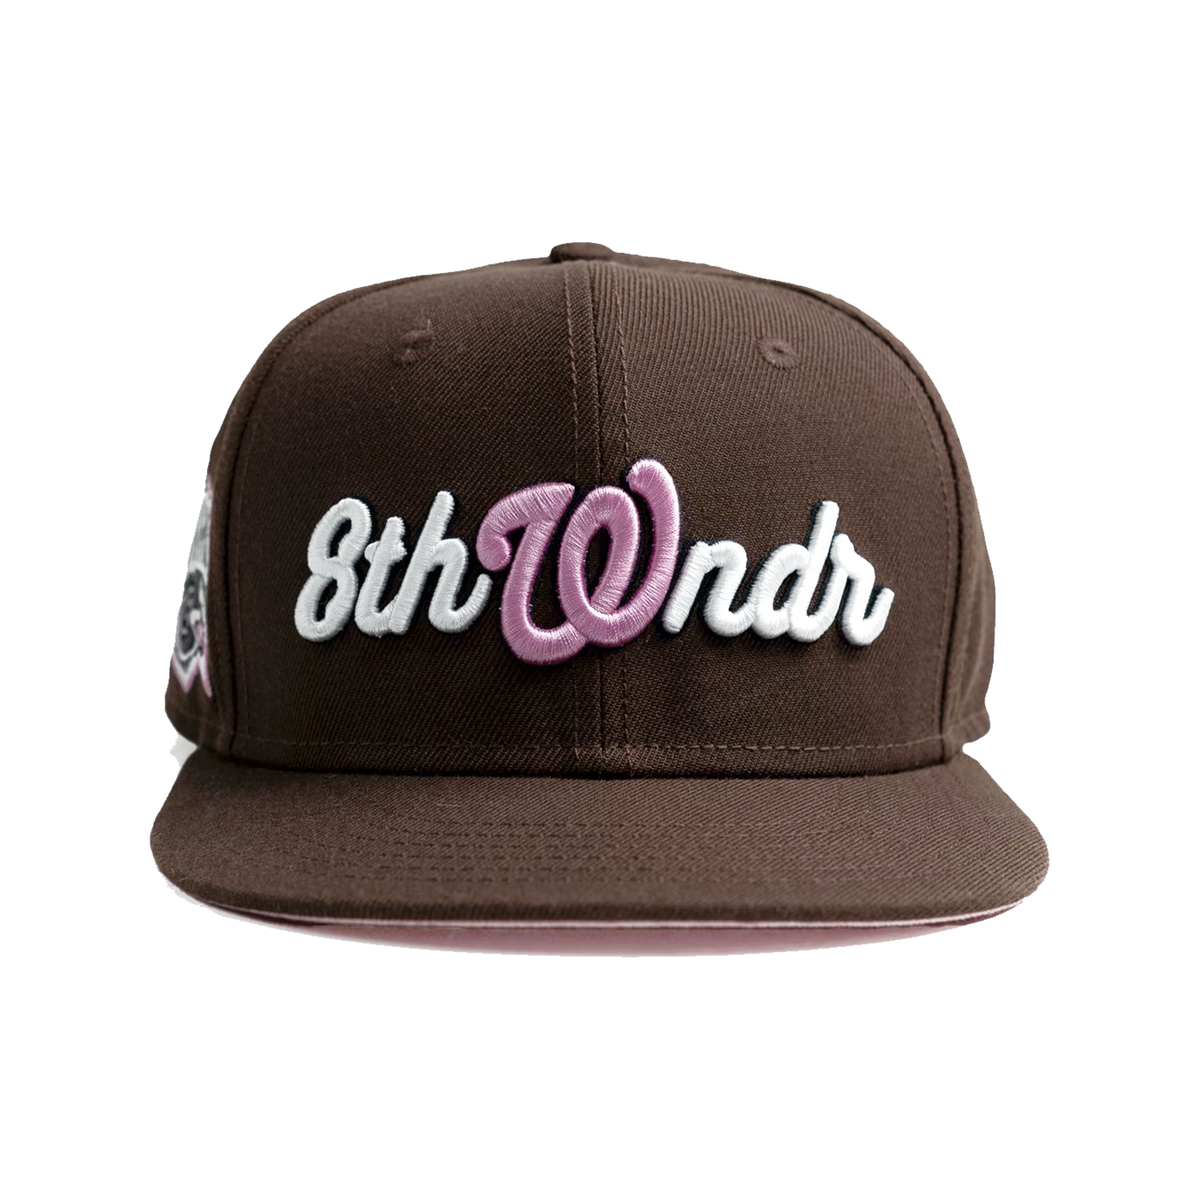 FITTED HAT BROWN / PINK